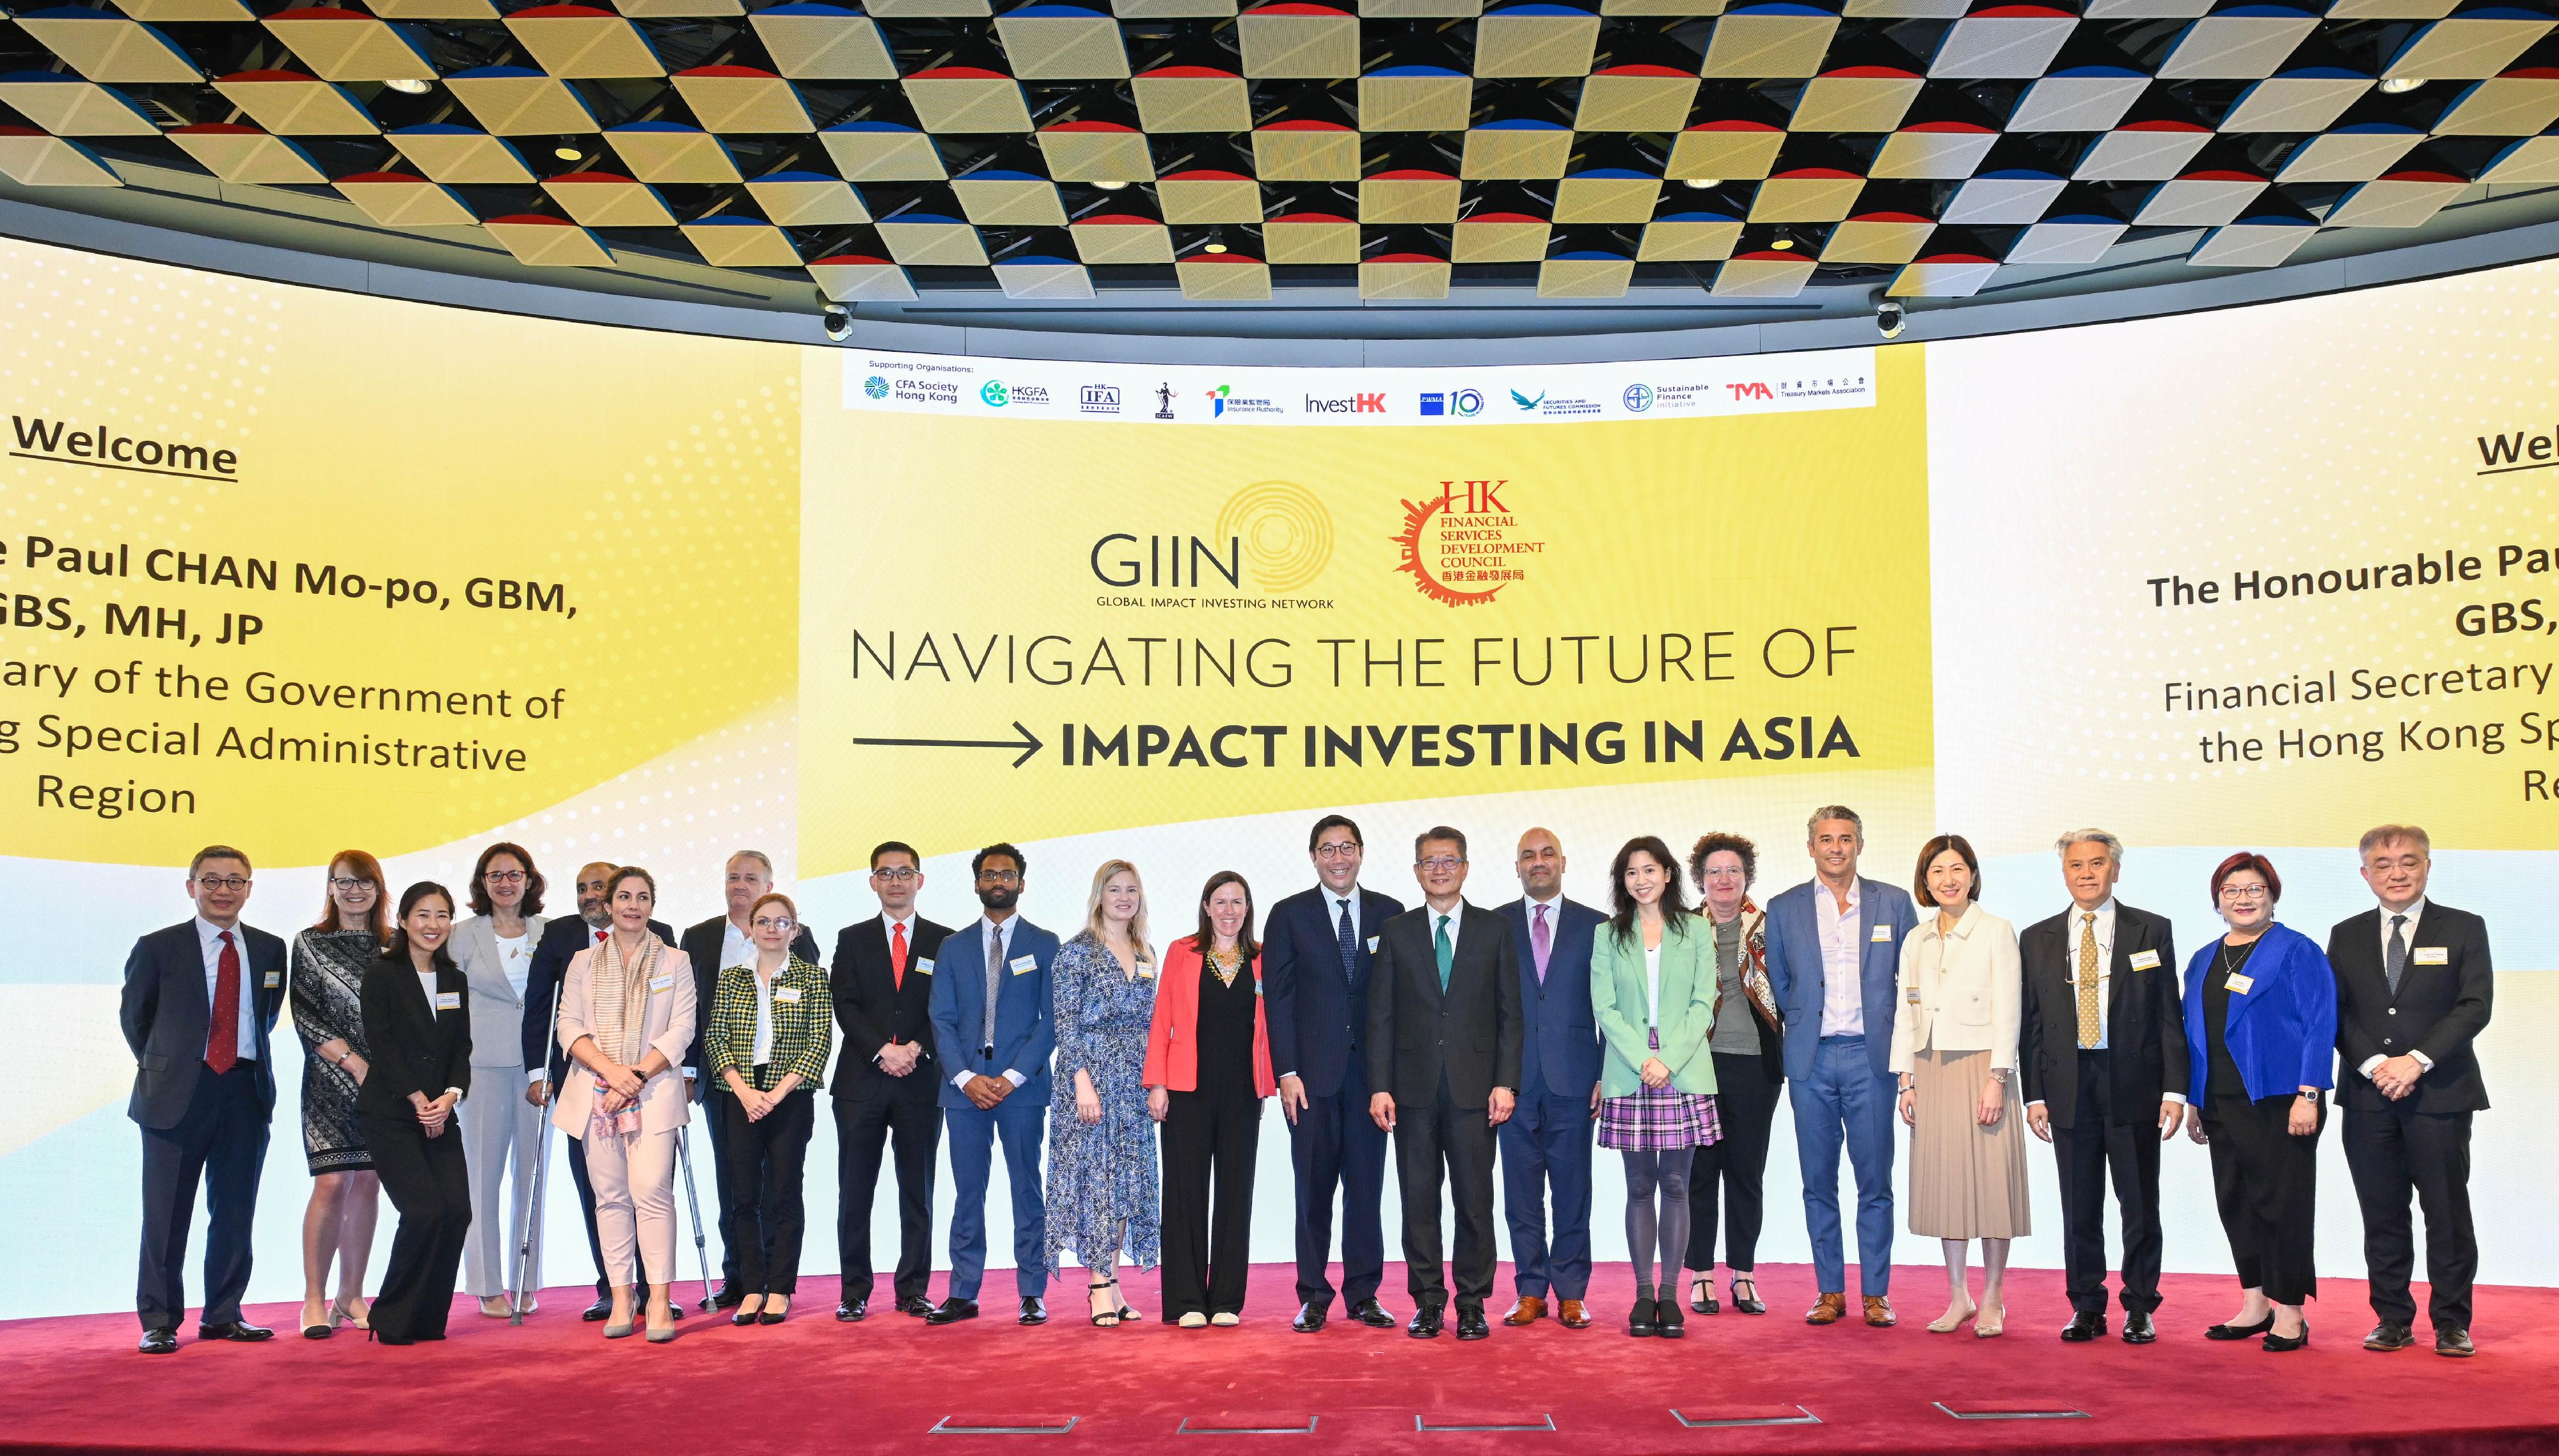 The Financial Secretary, Mr Paul Chan, attended the Navigating the Future of Impact Investing in Asia conference co-hosted by the Financial Services Development Council (FSDC) and the Global Impact Investing Network (GIIN) today (May 9). Photo shows Mr Chan (ninth right); the Chairman of the FSDC, Mr Laurence Li, SC (10th right); the Chief Executive Officer and Co-Founder of the GIIN Mr Amit Bouri (eighth right), and other guests at the conference.